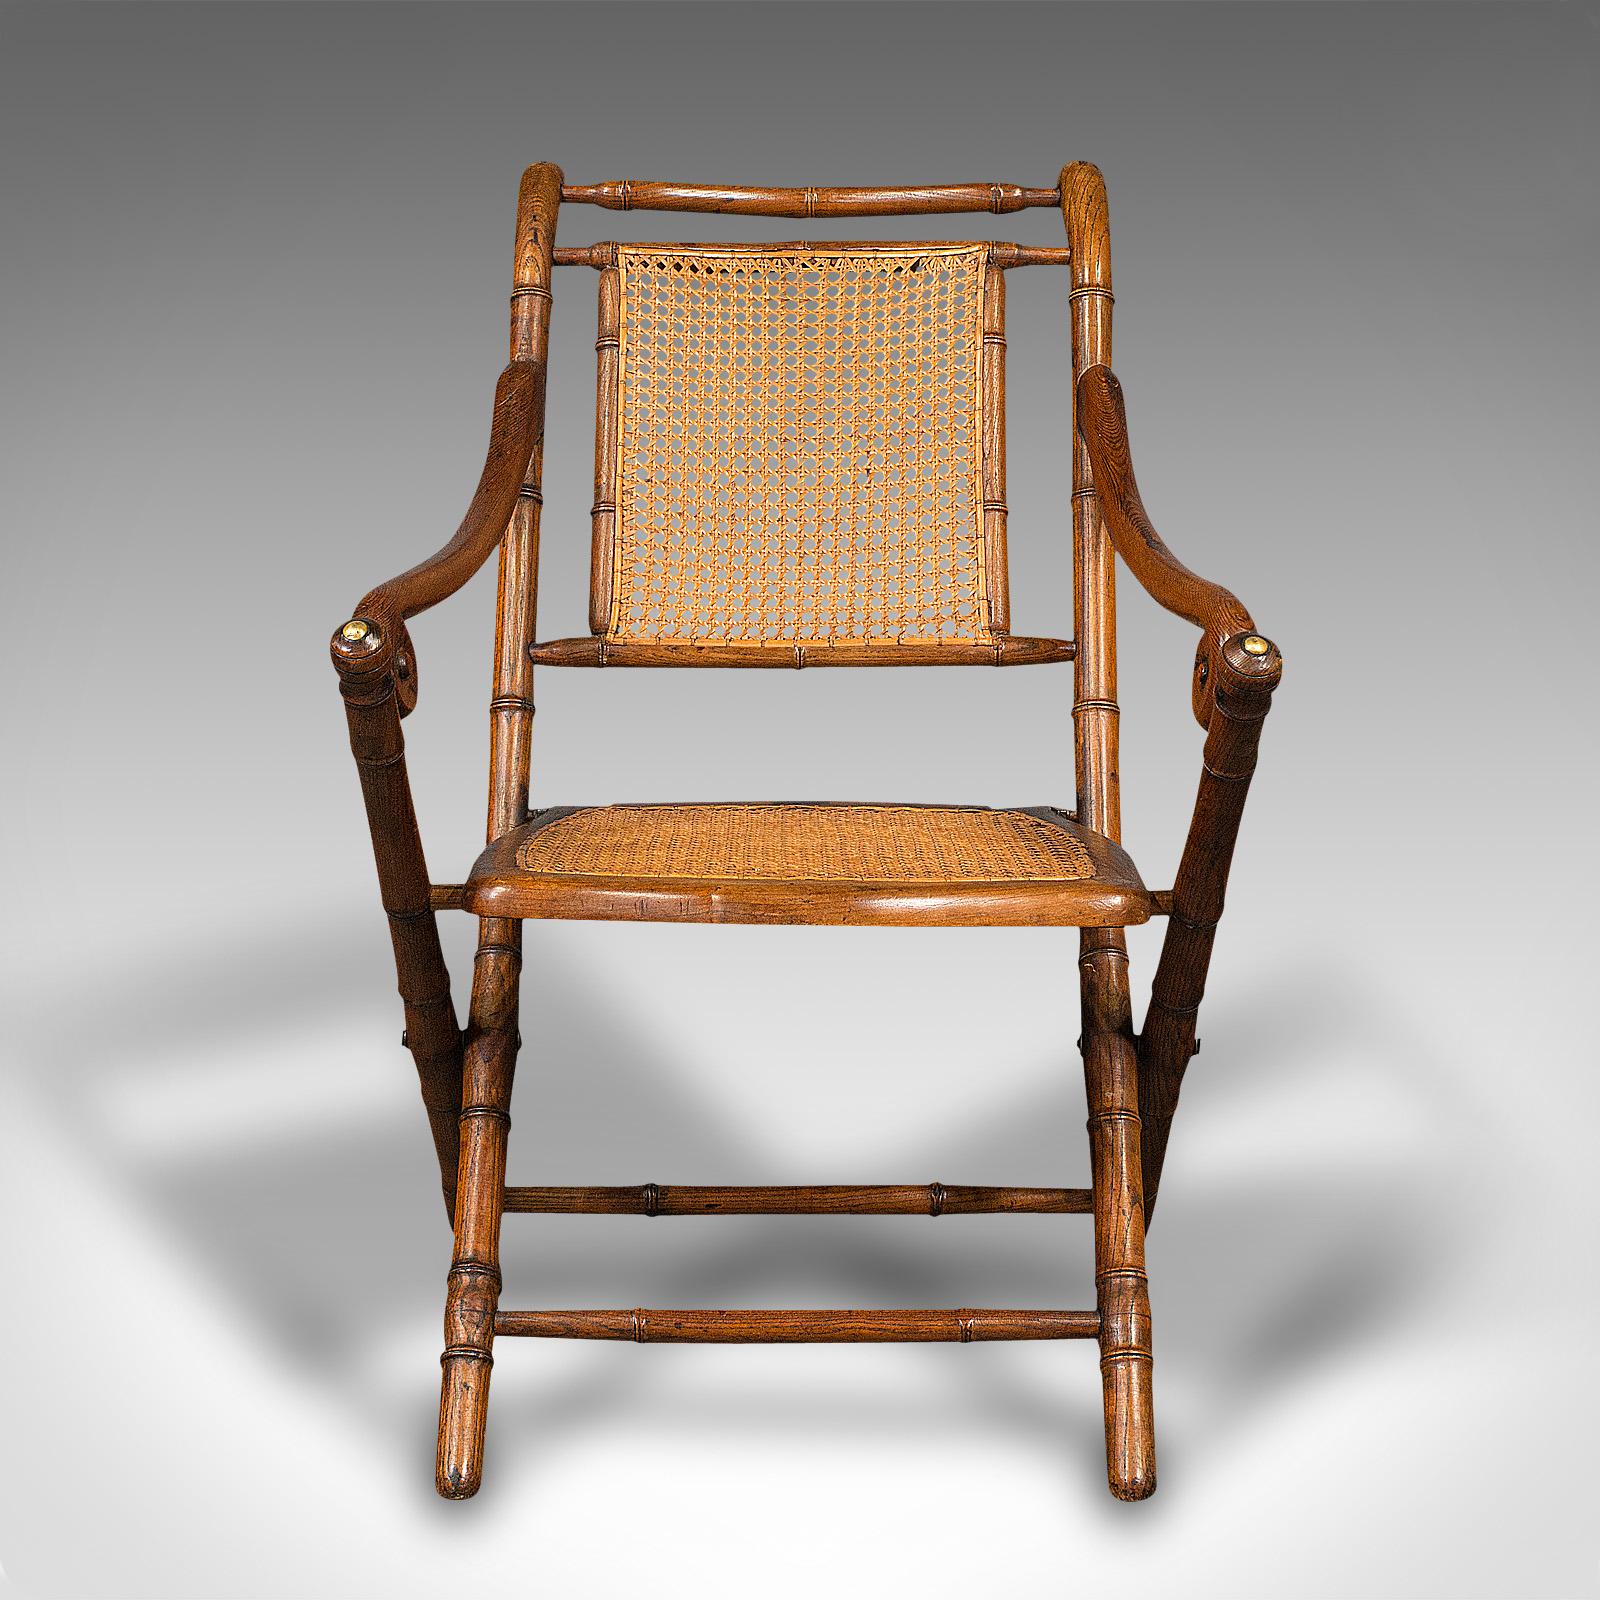 This is an antique veranda chair. An Anglo-Indian, oak bentwood colonial seat, dating to the Victorian period, circa 1870.

Graced with delightful forms and wonderful colour
Displays a desirable aged patina throughout
Distinctive oak bentwood